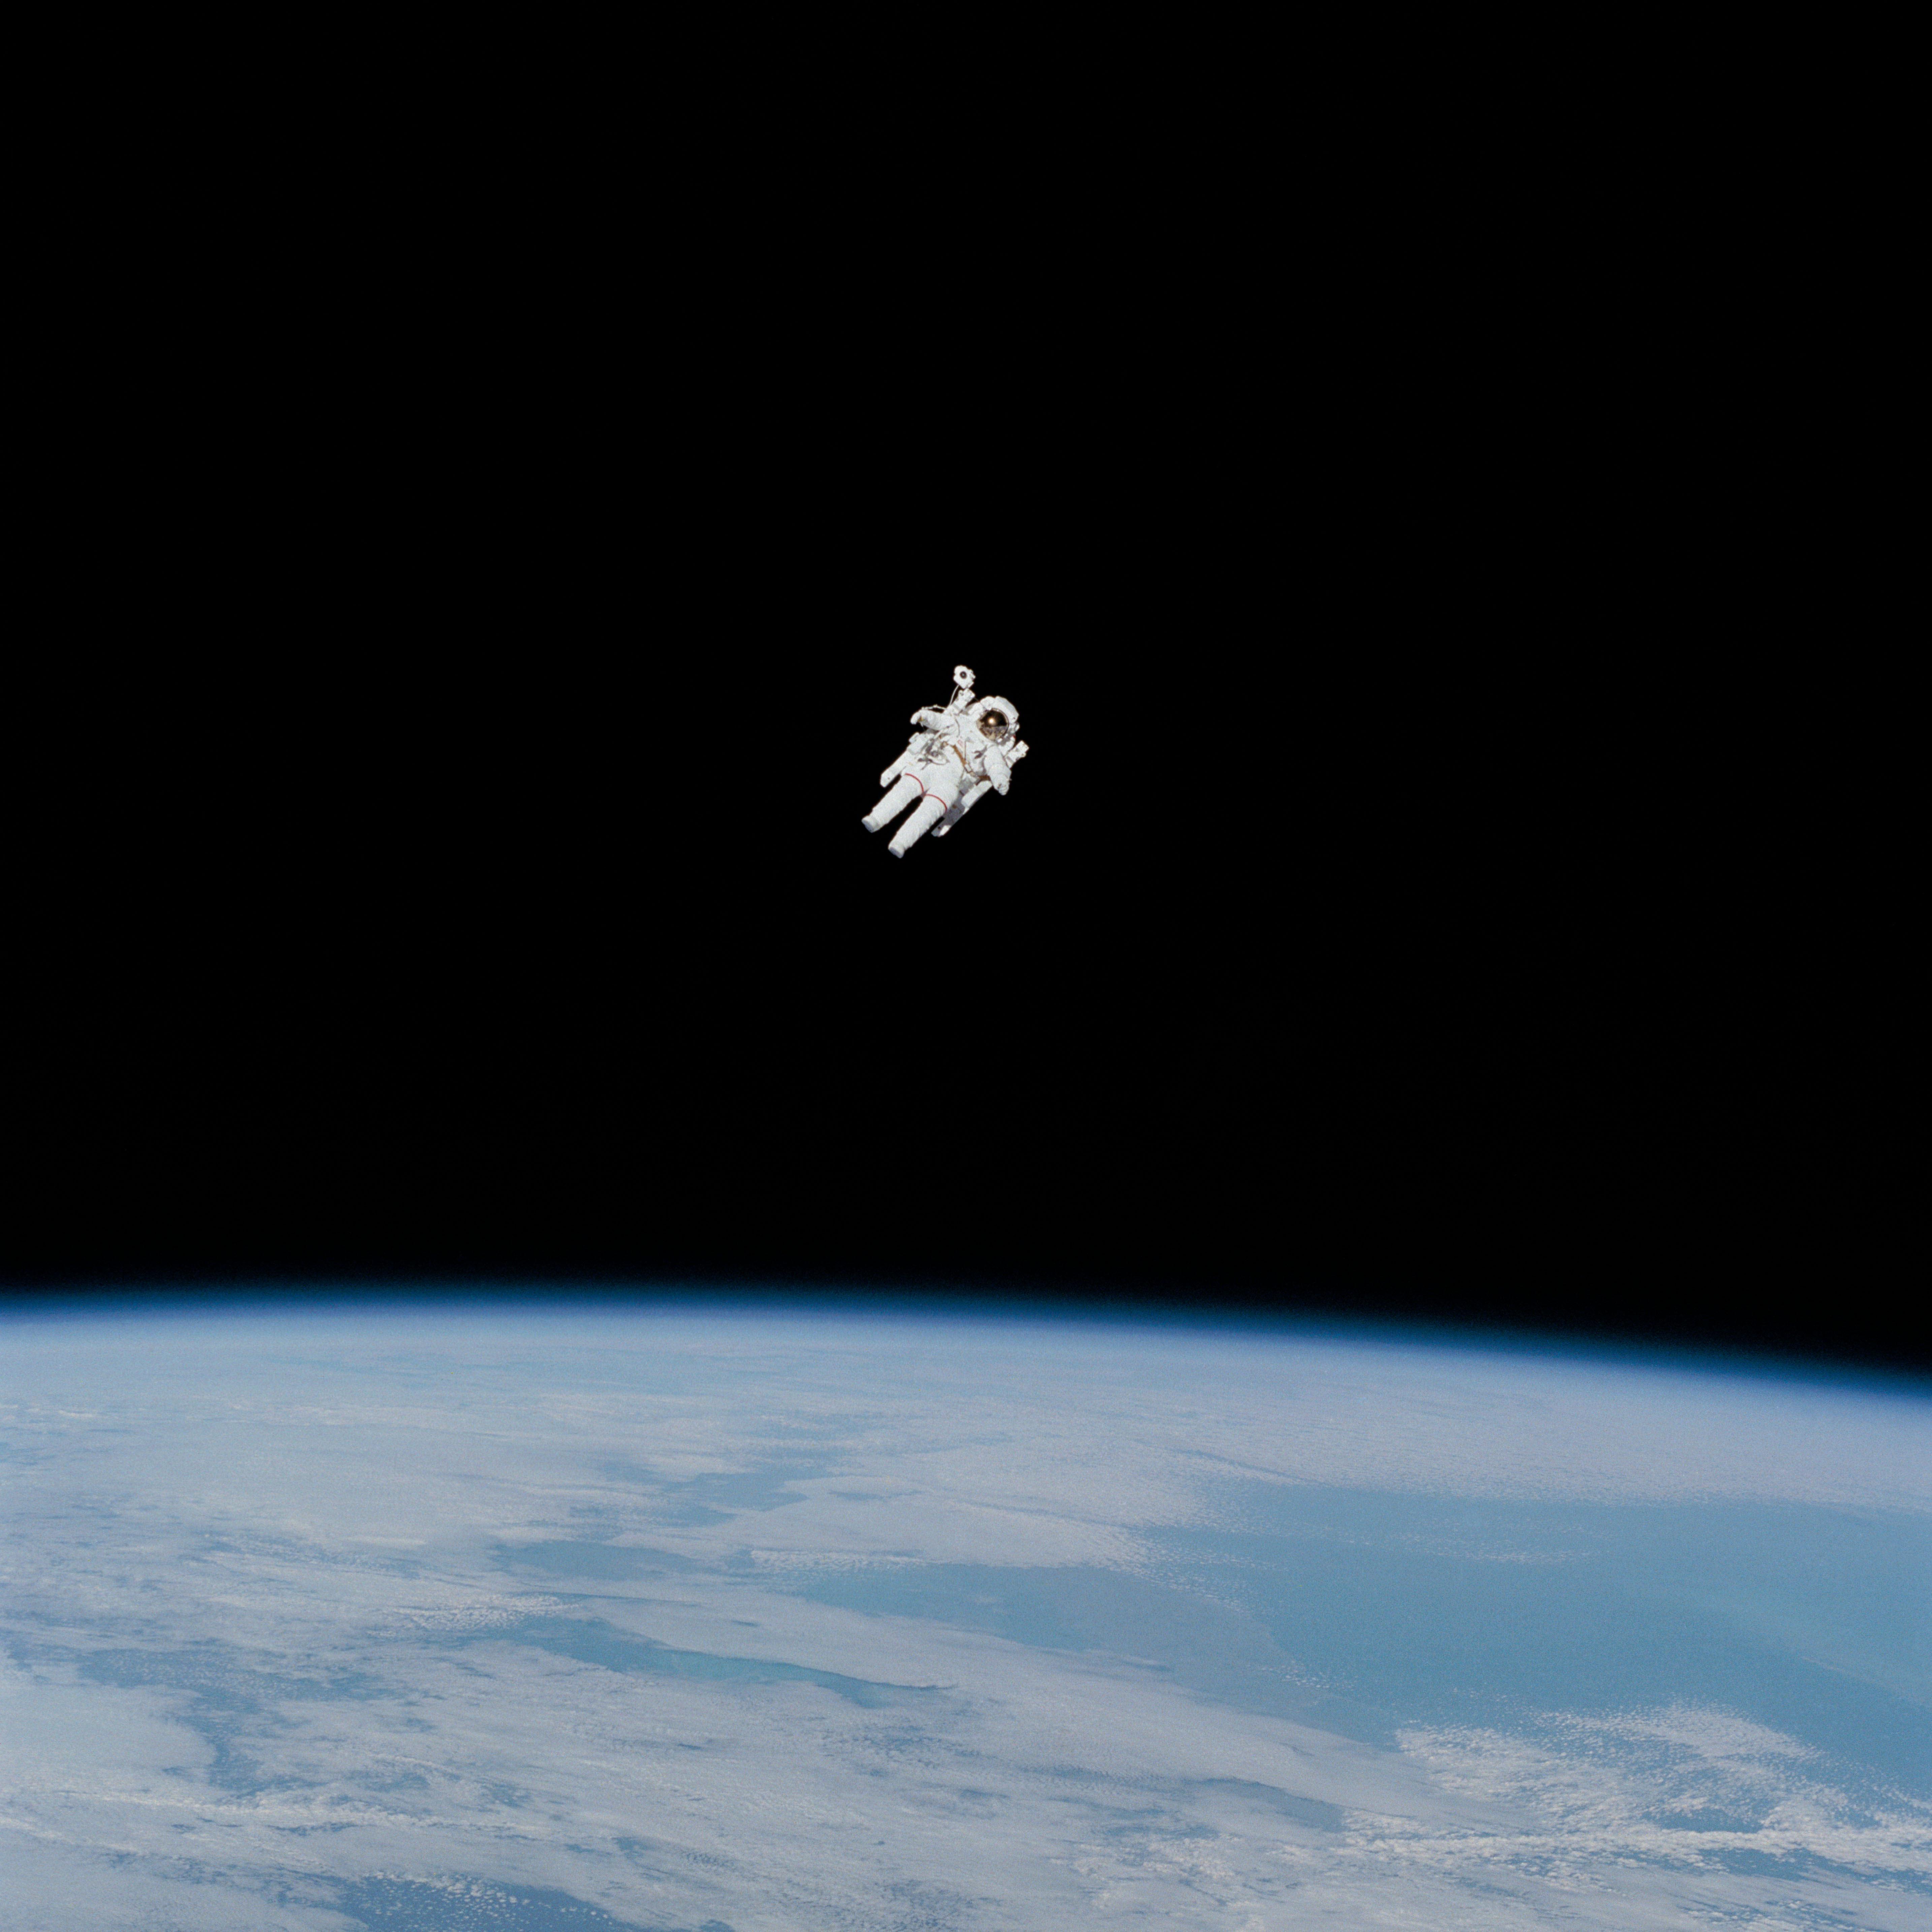 An astronaut is surrounded by empty space as he floats at a 45-degree angle above Earth.